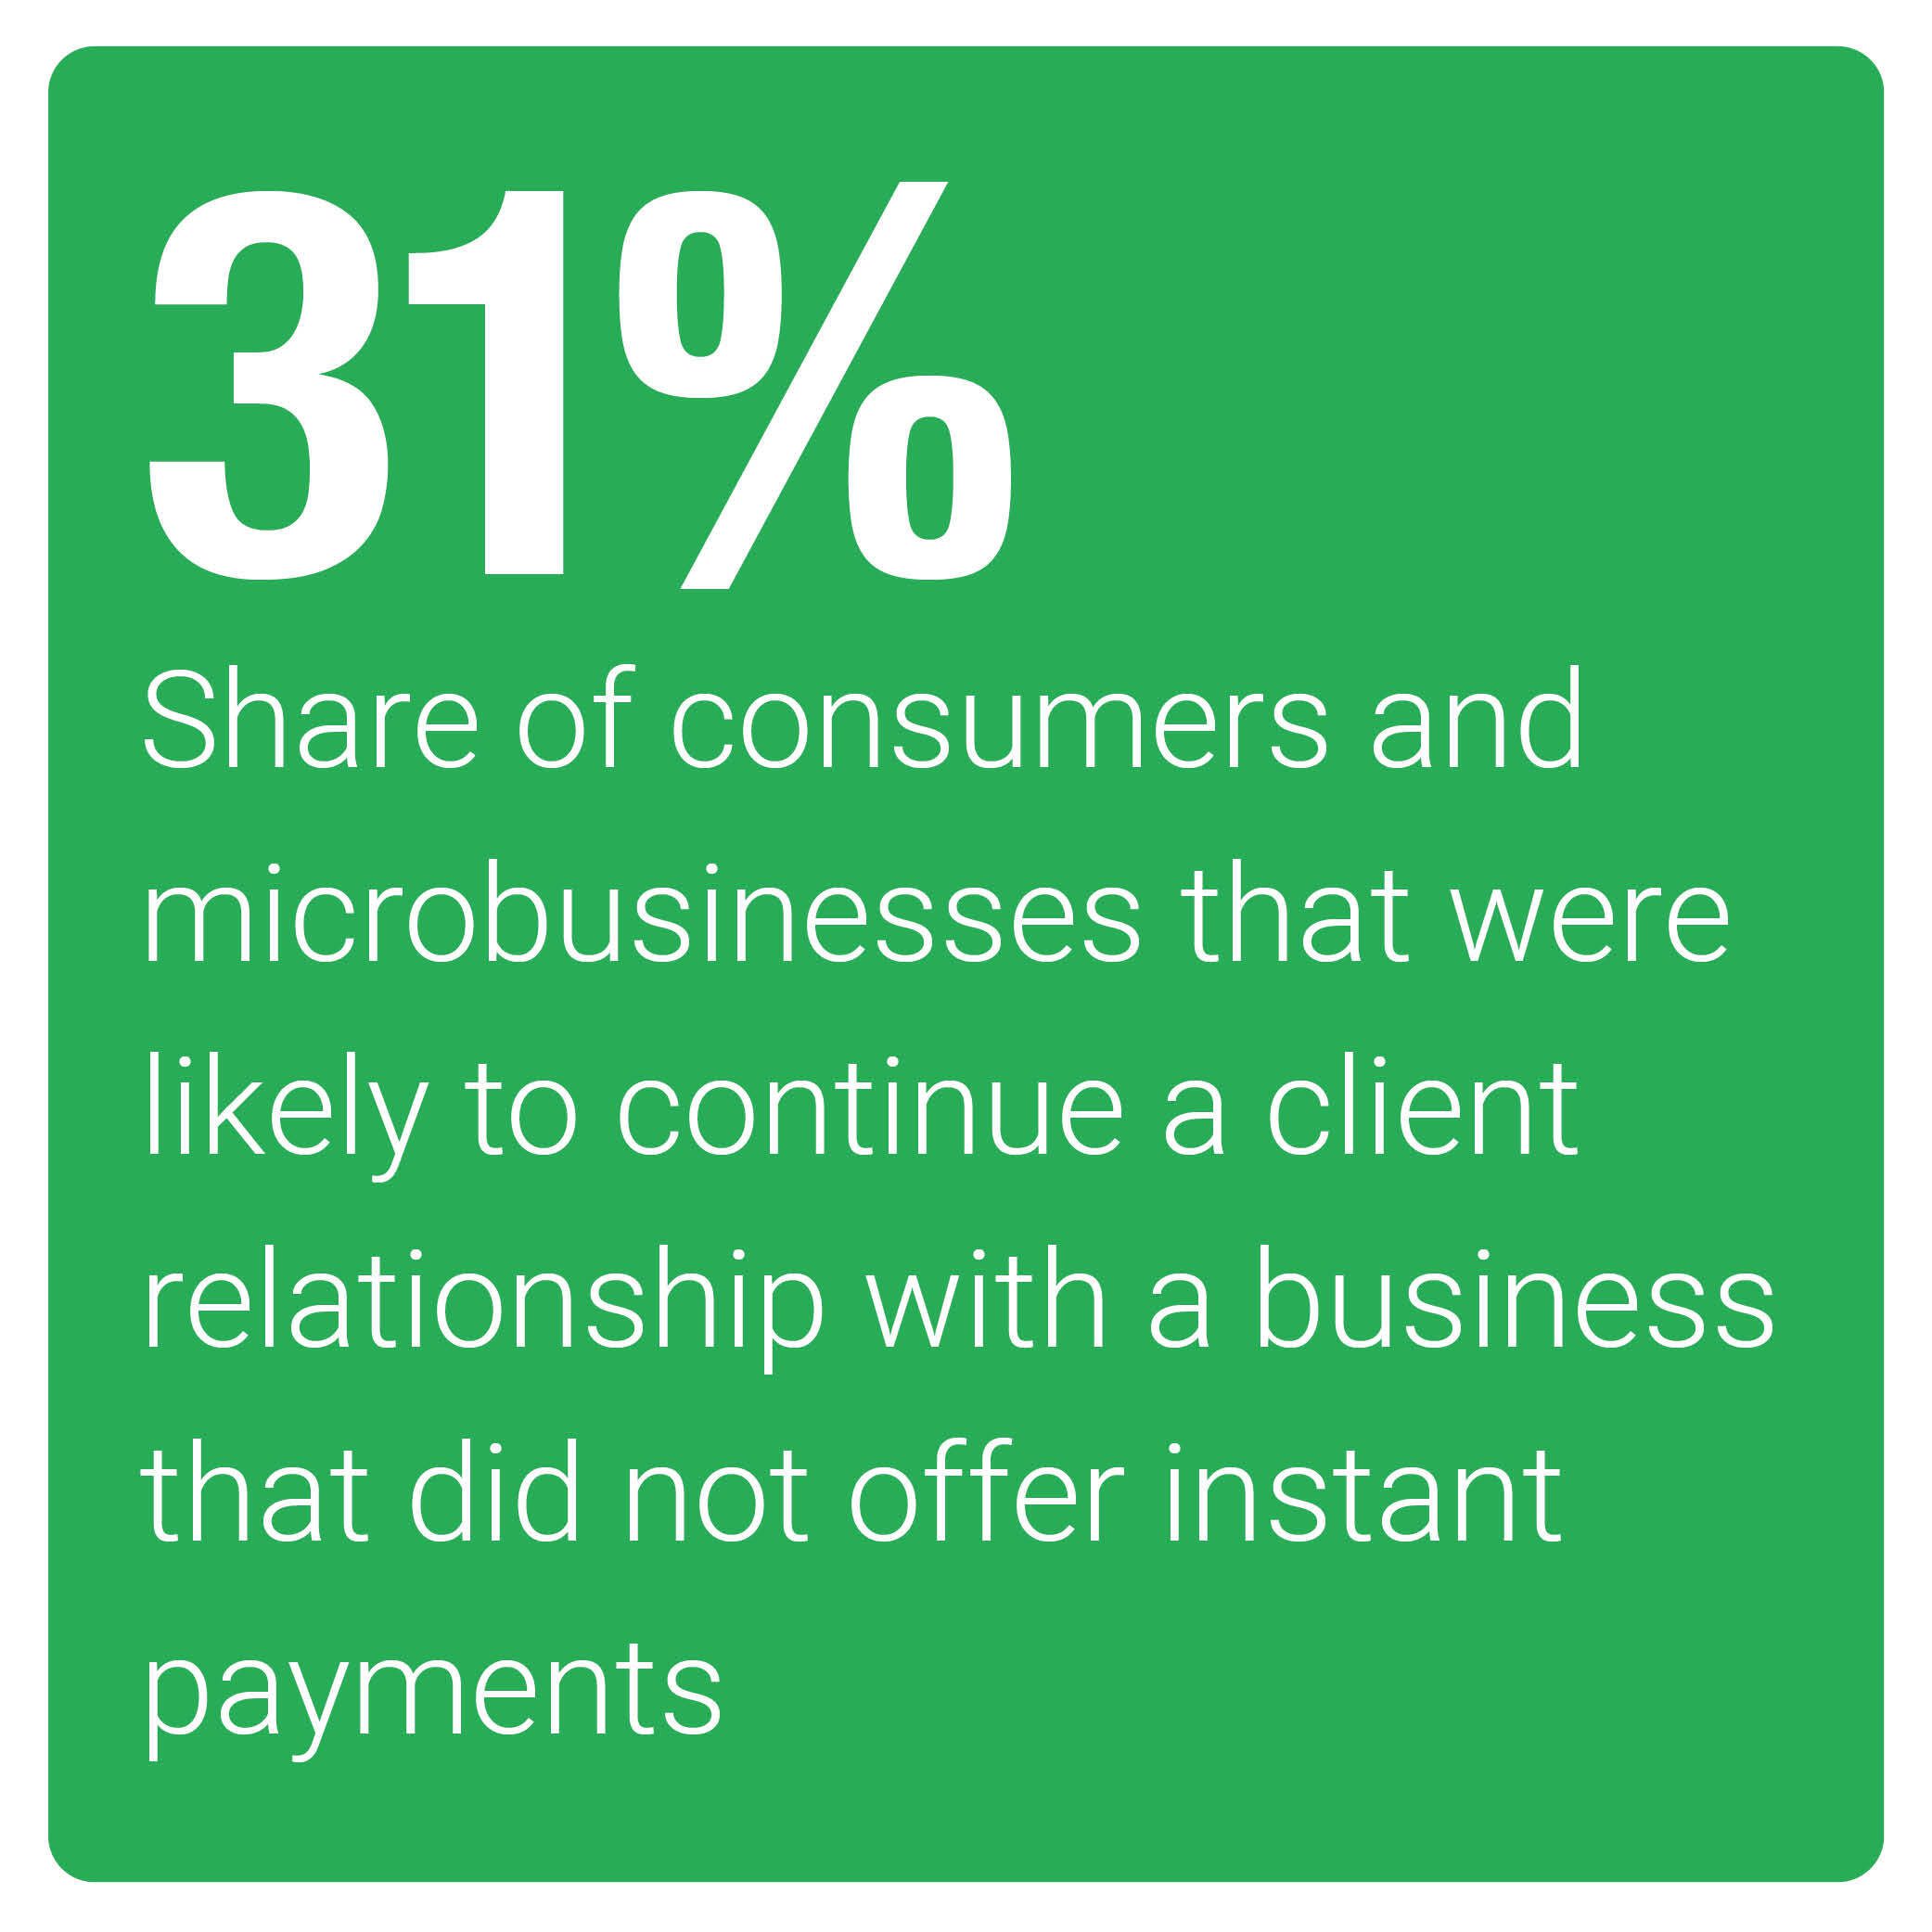 Share of consumers and micro businesses that were likely to continue a client relationship with a business that did not offer instant payments